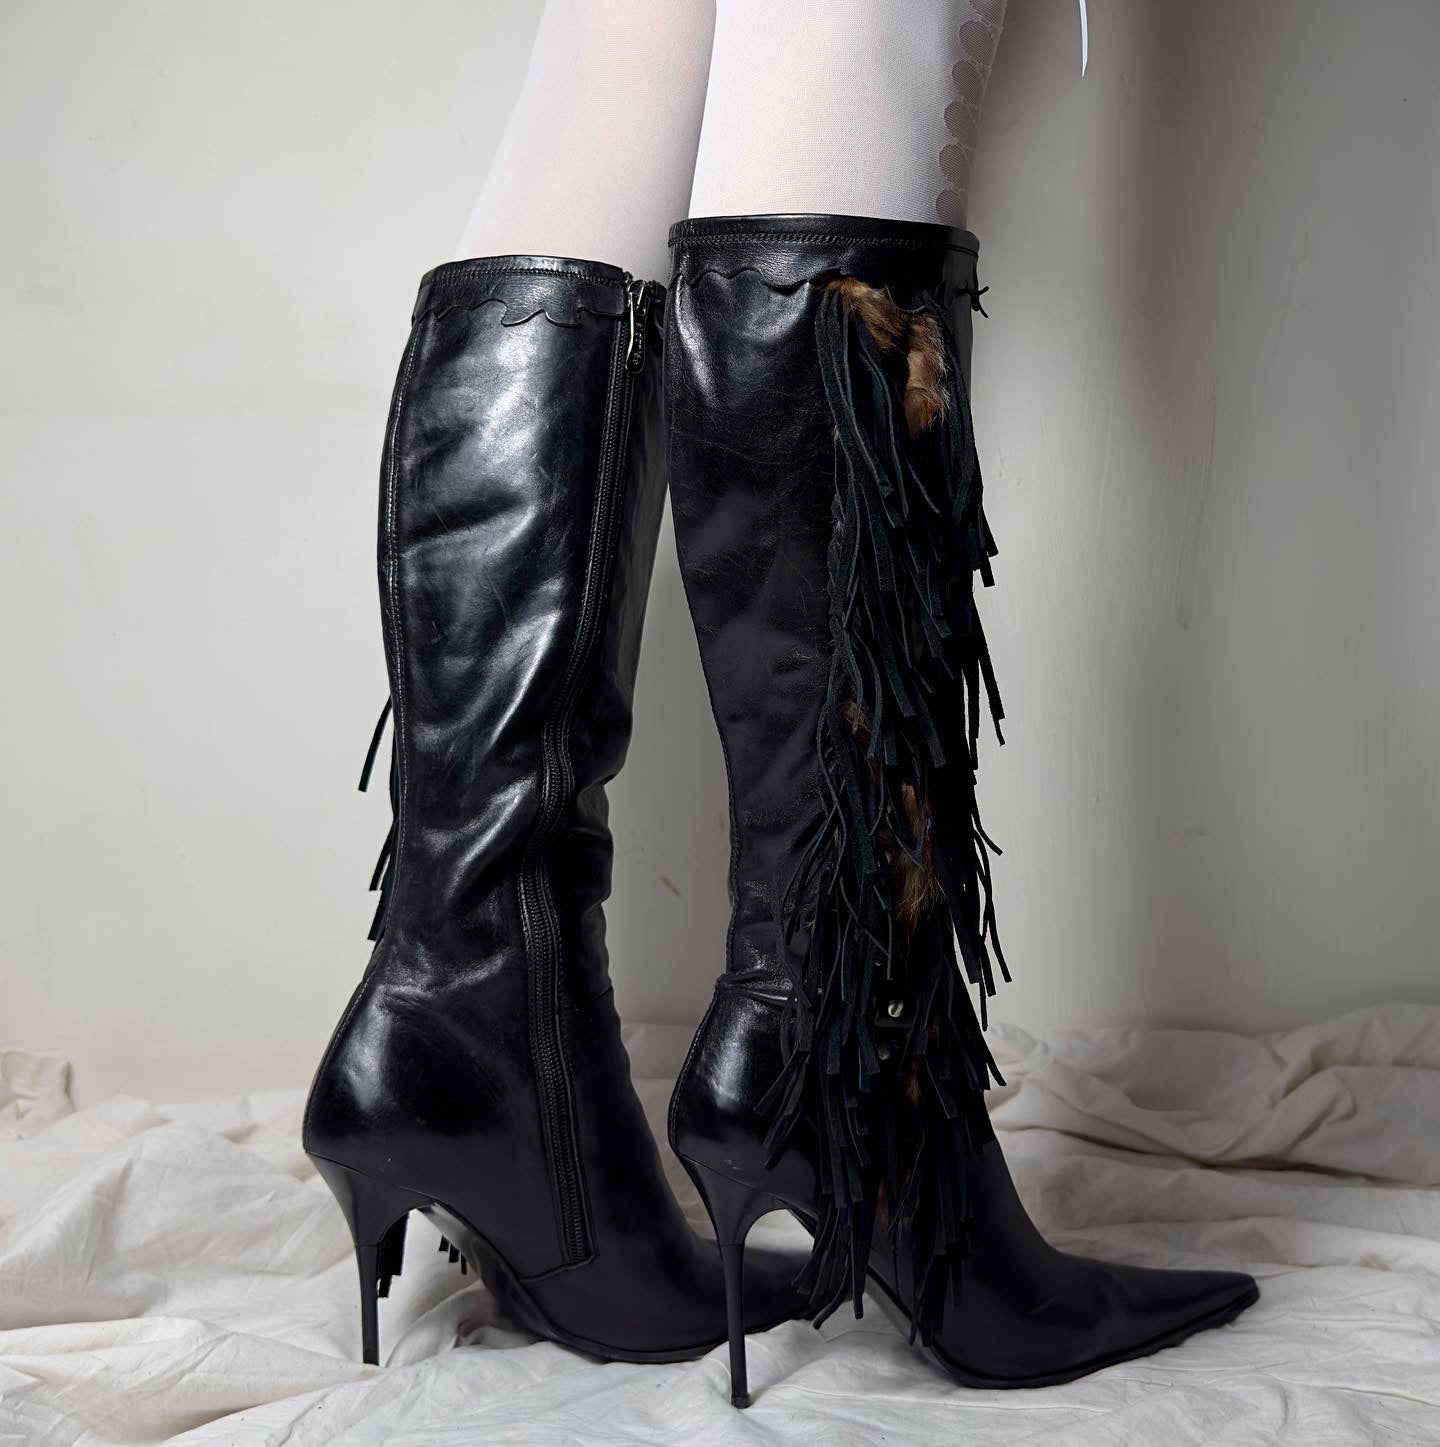 El Dante’s Pointy Toe Leather Boots 36/37